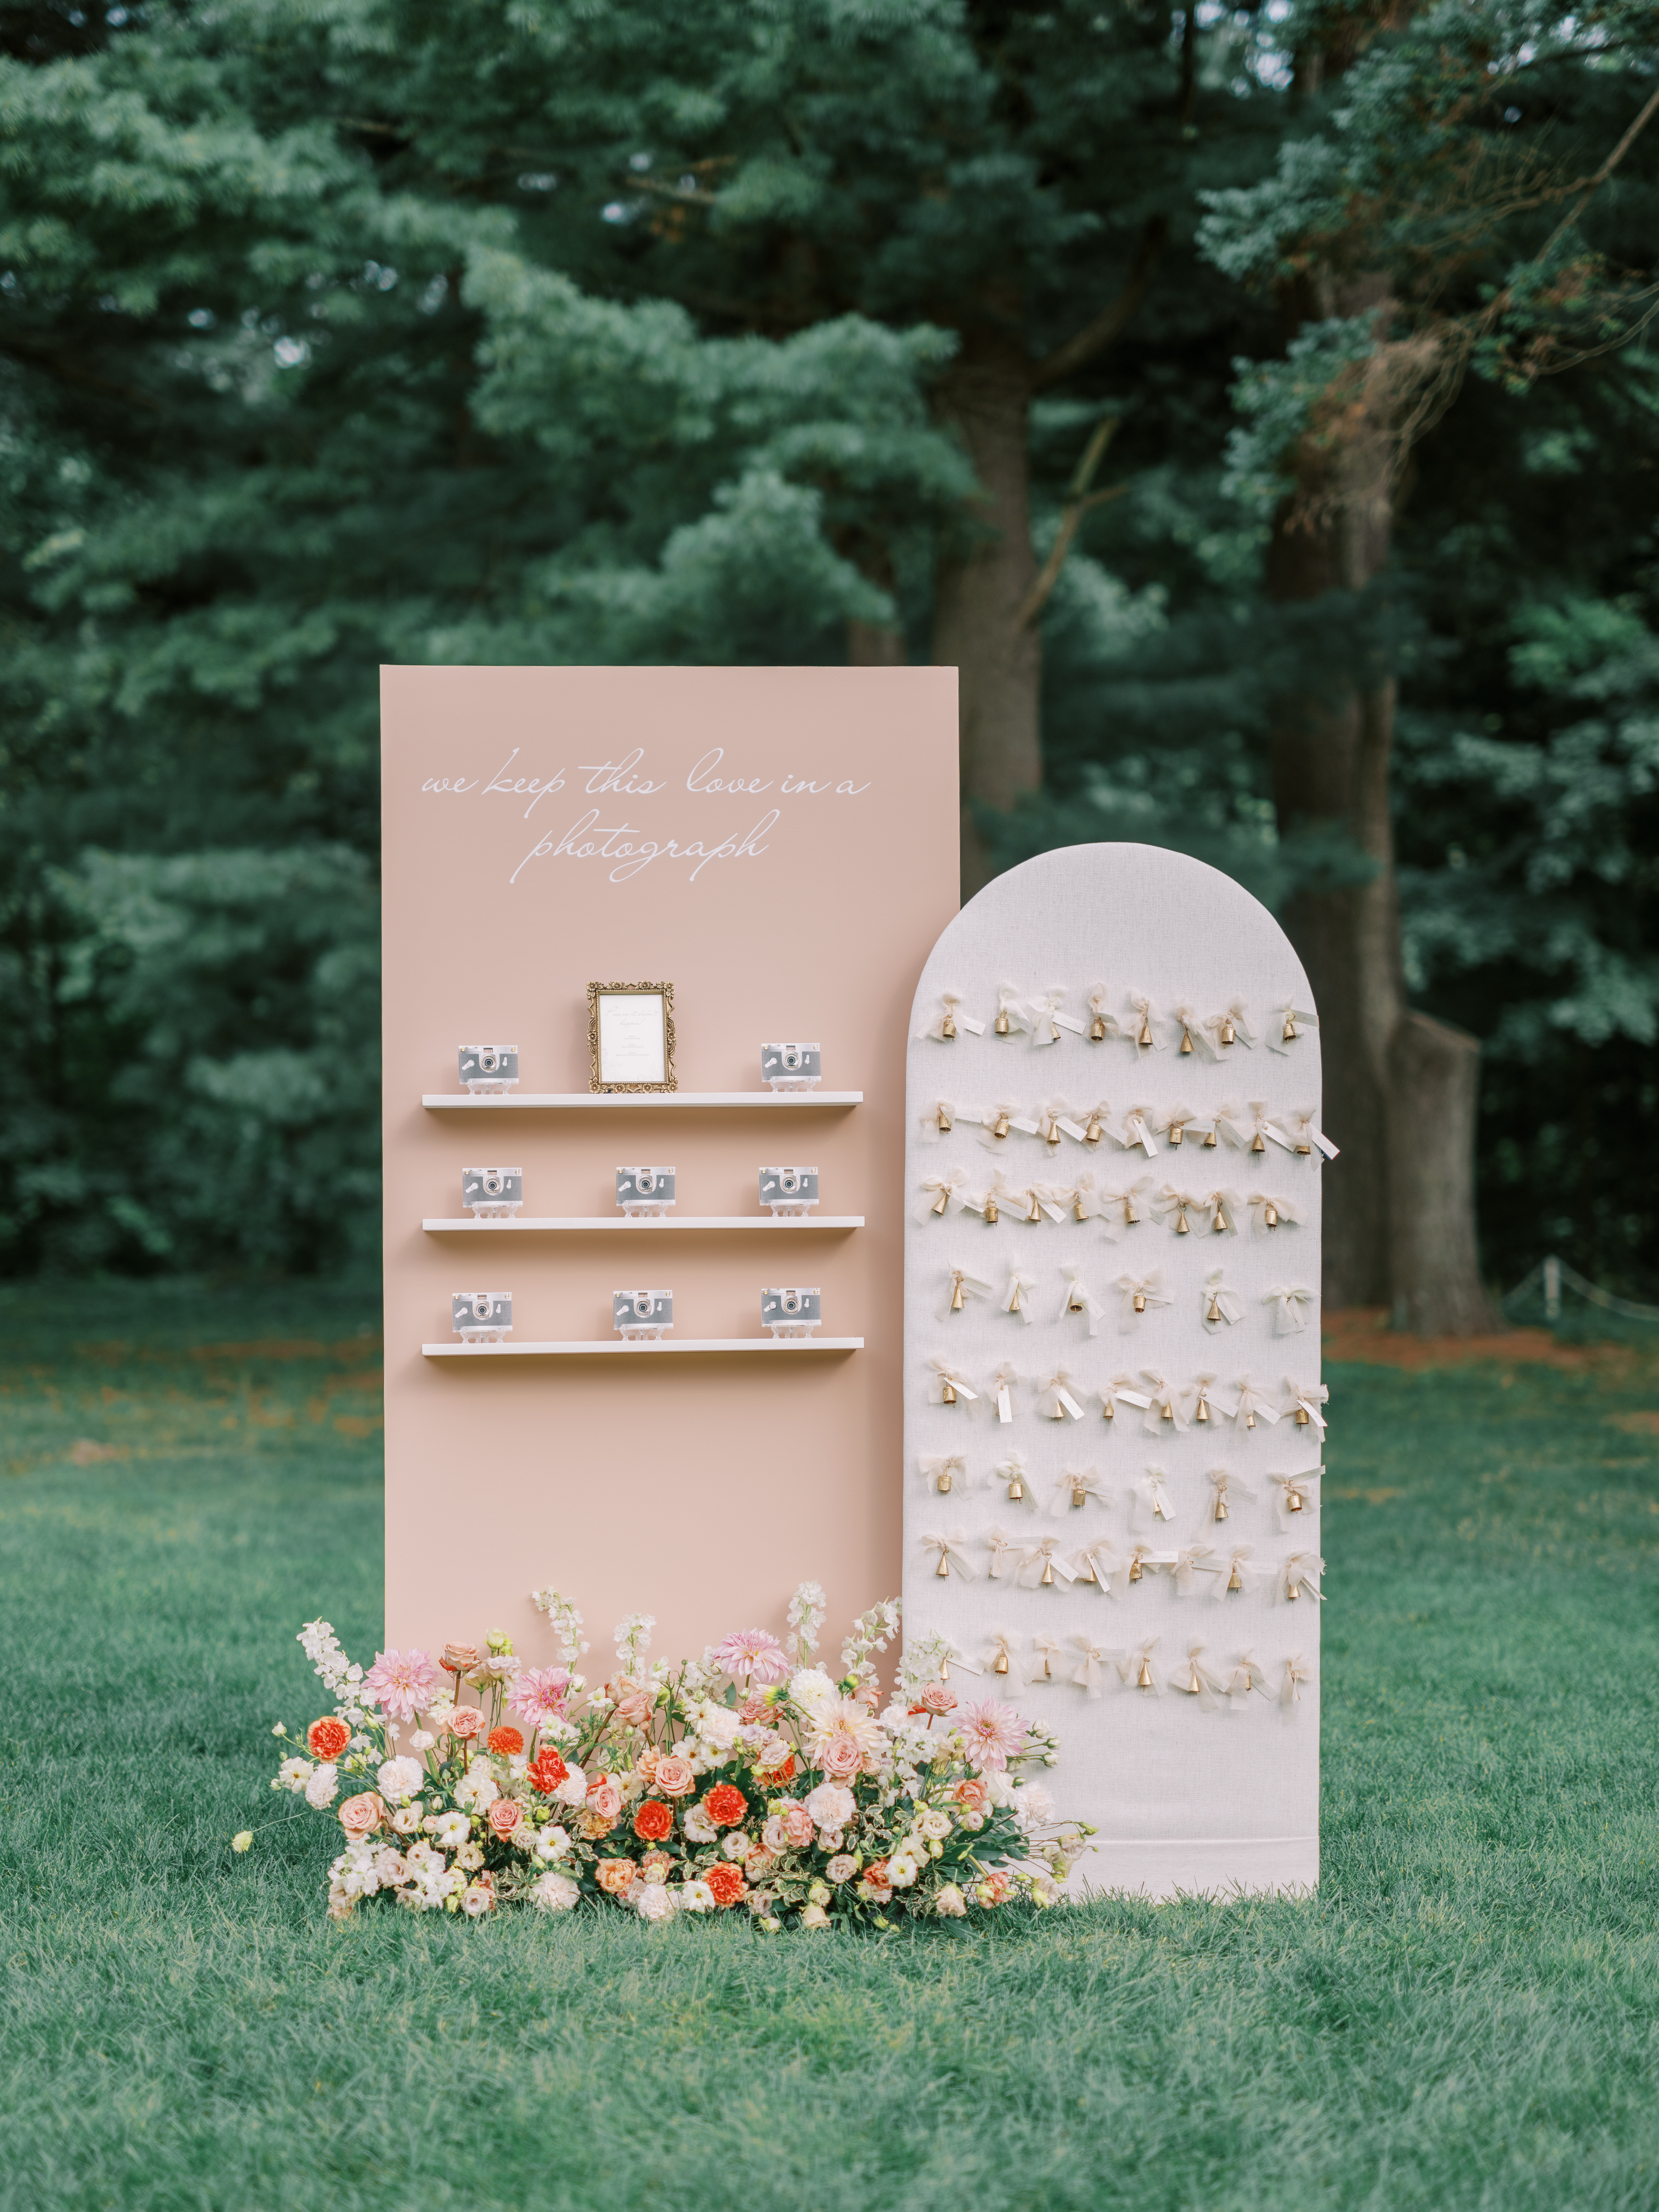 our wedding featured on the knot at wadsworth mansion with custom built seating chart wall